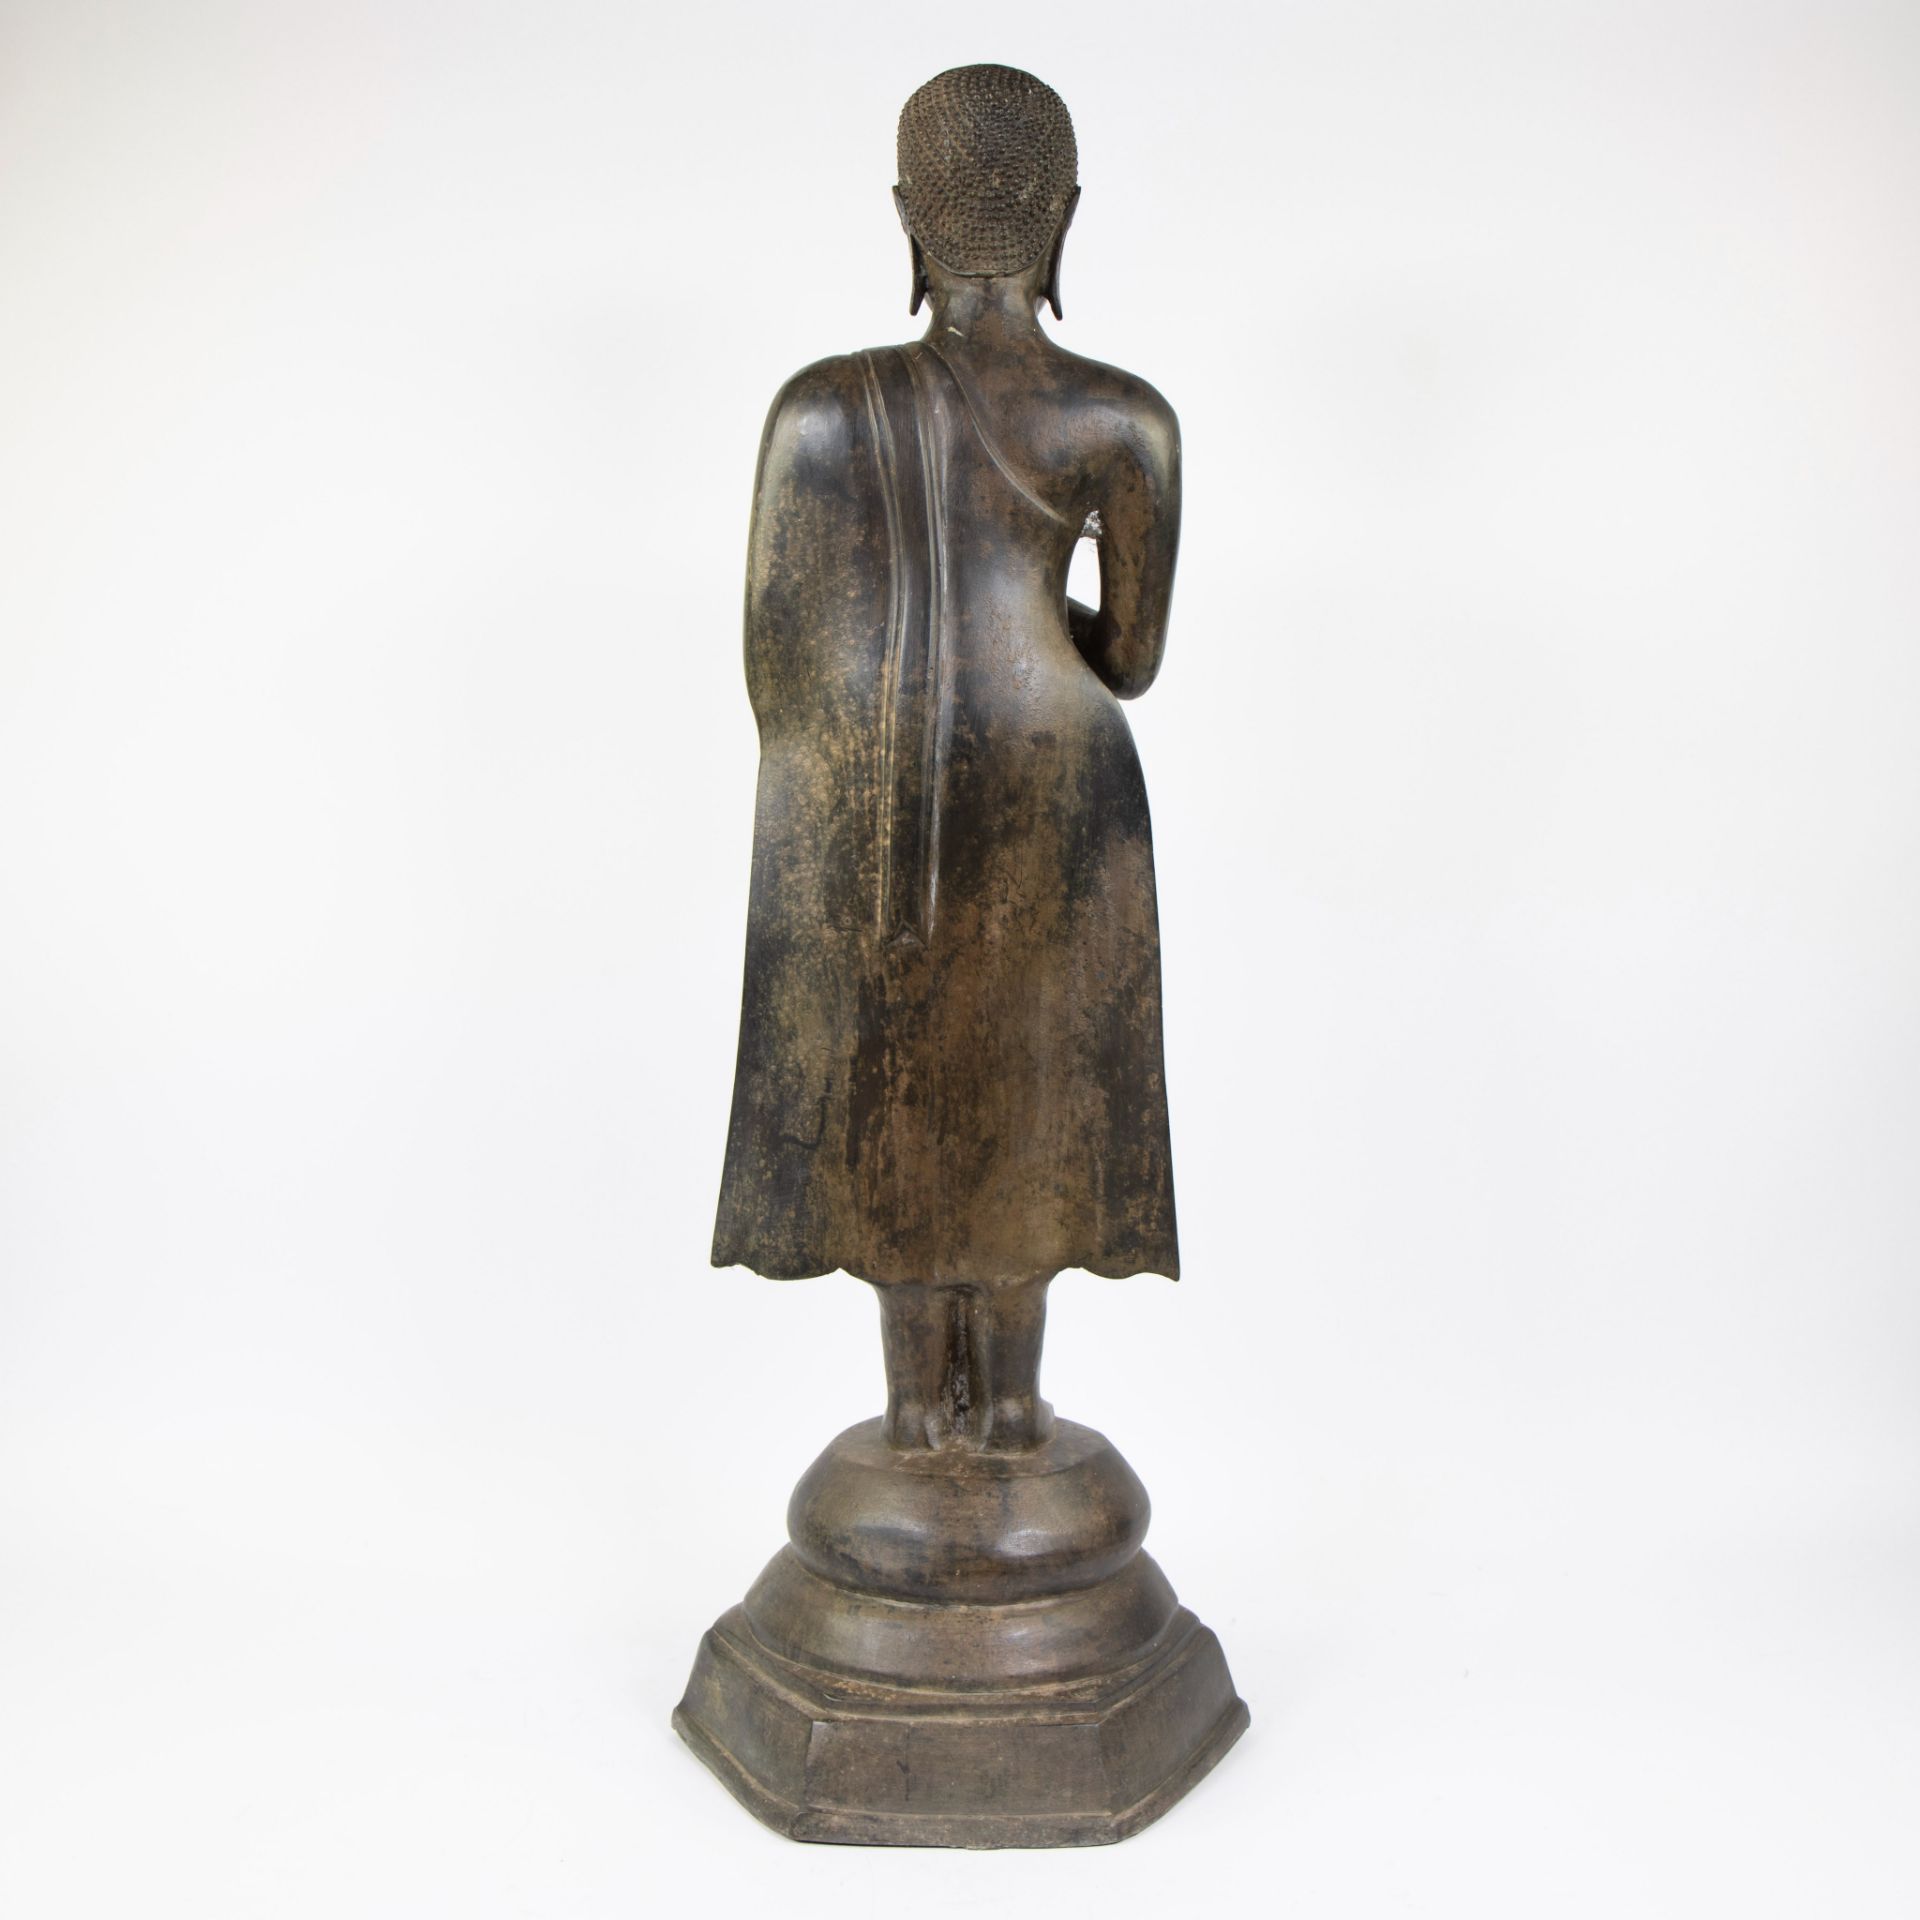 Bronze depiction of a worshiper of a Buddha late Ayutthaya - 17-18th century Thailand - Image 3 of 5